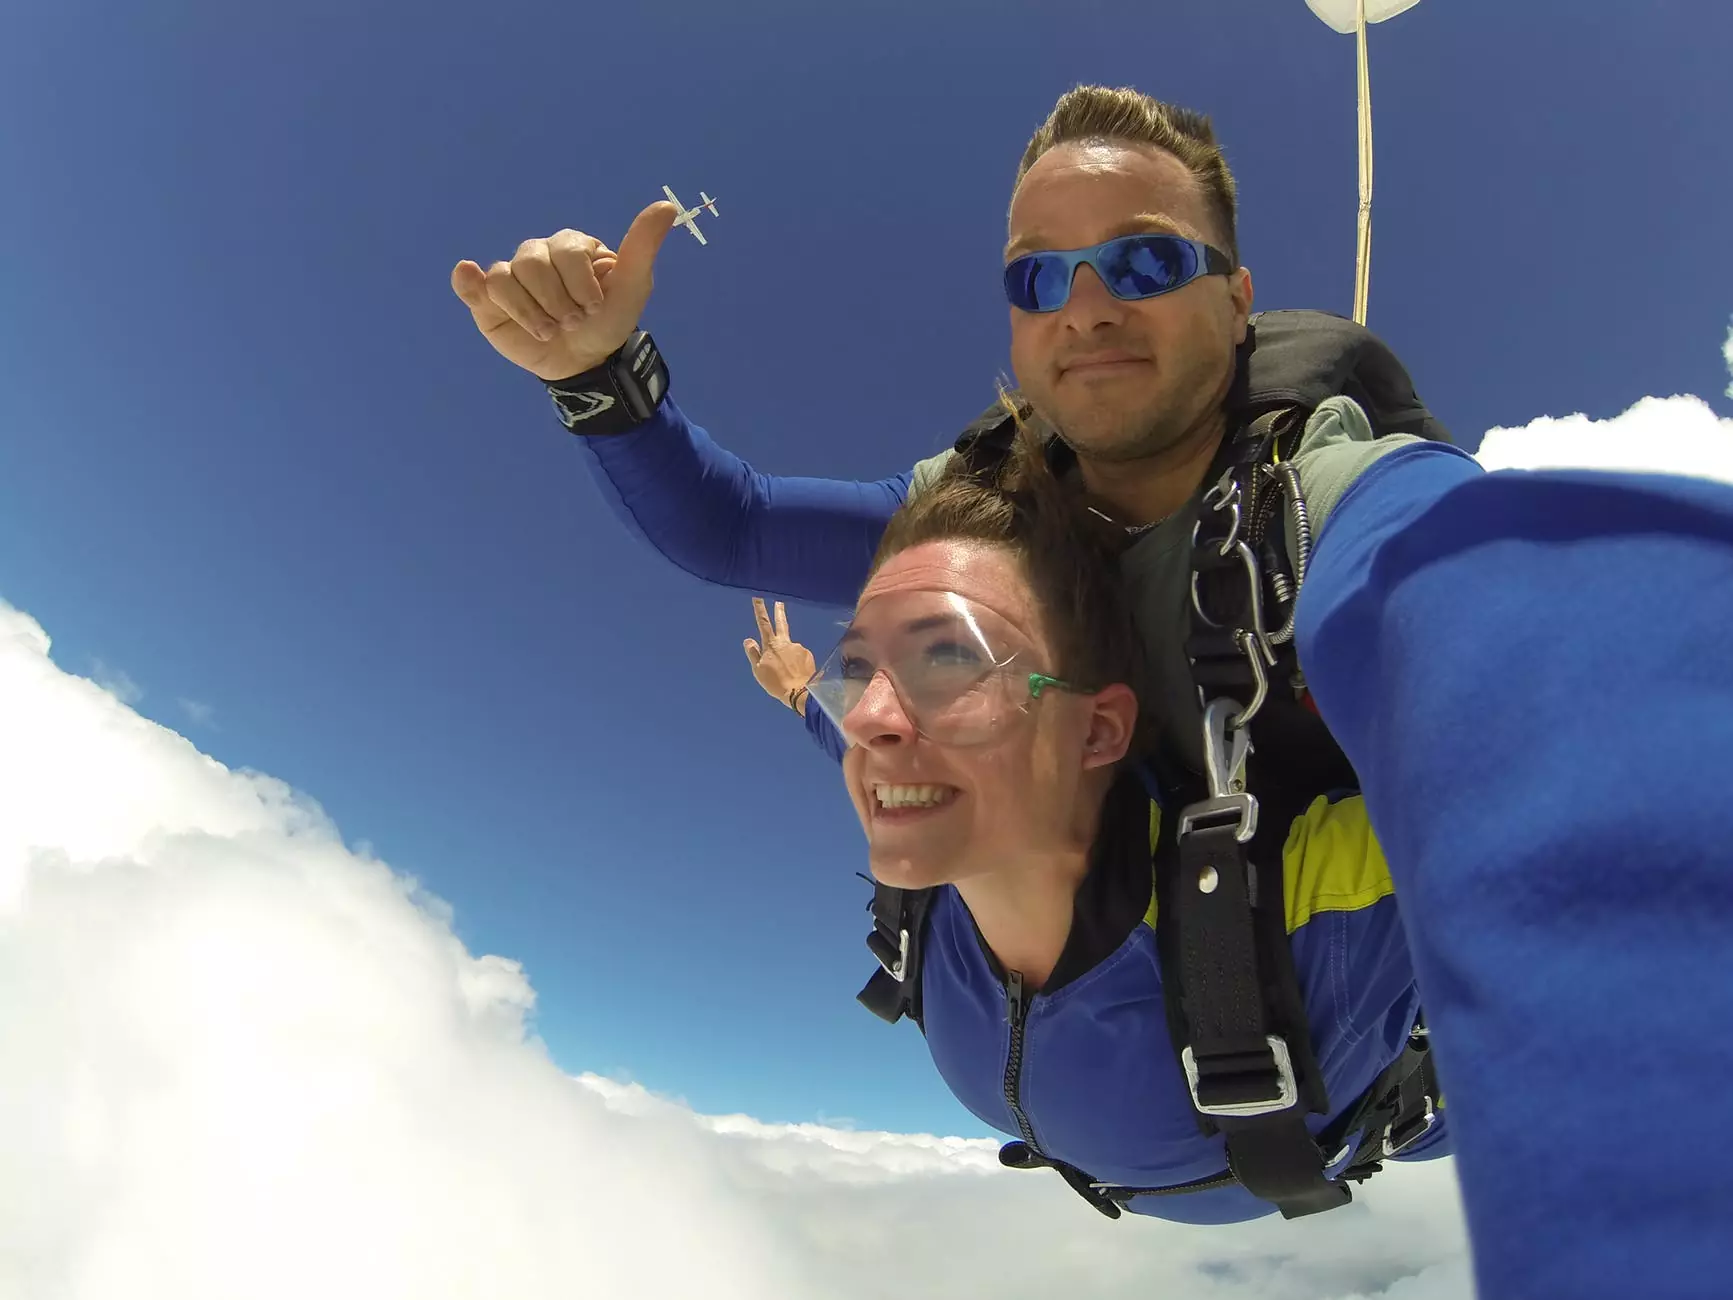 man and woman in blue jacket doing sky diving